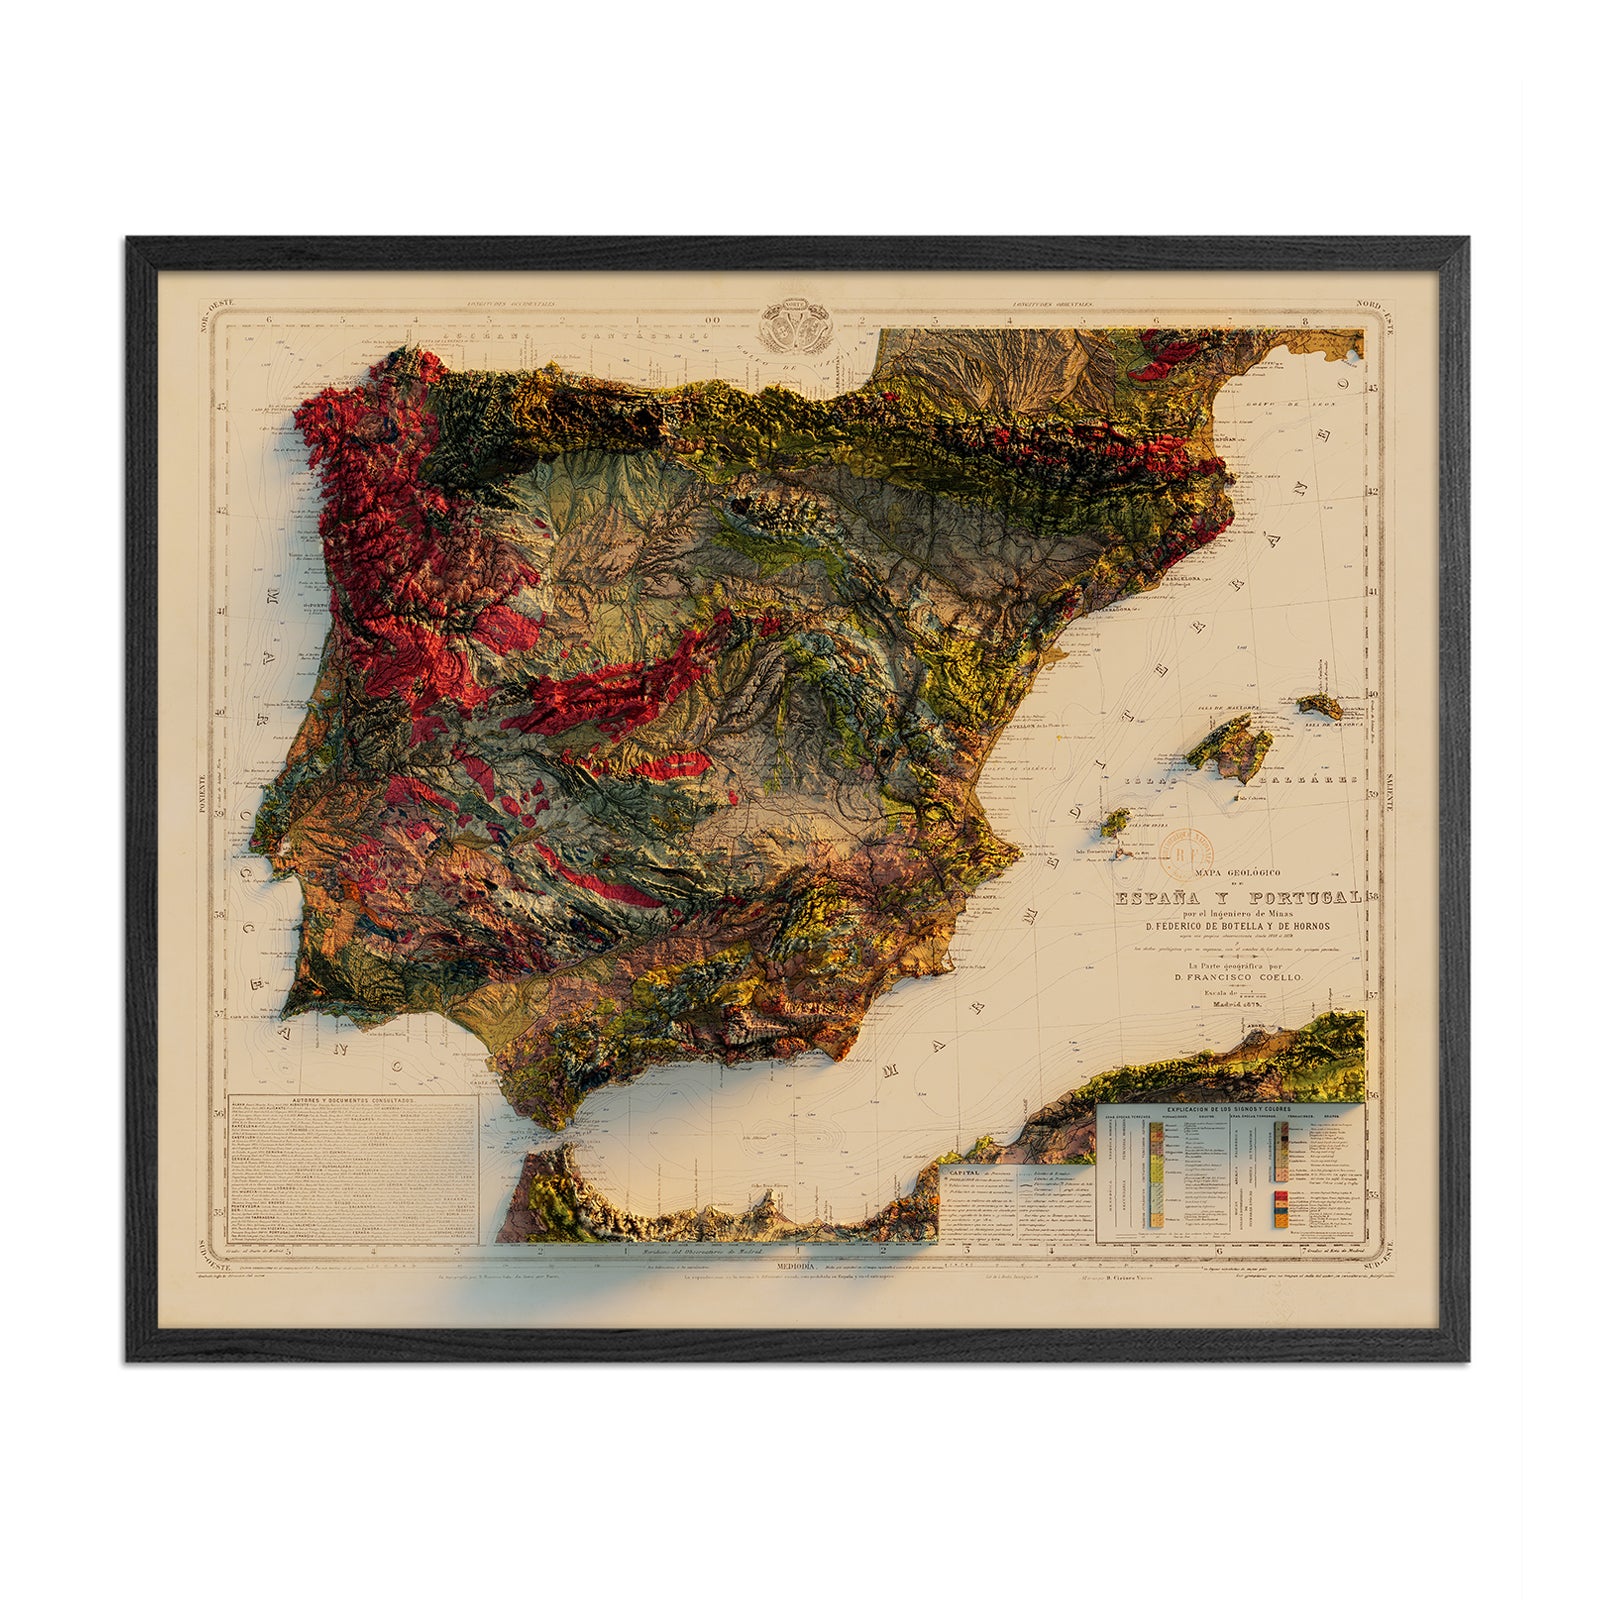 Large detailed old political and administrative map of Spain and Portugal  with relief, roads and cities - 1857, Spain, Europe, Mapsland